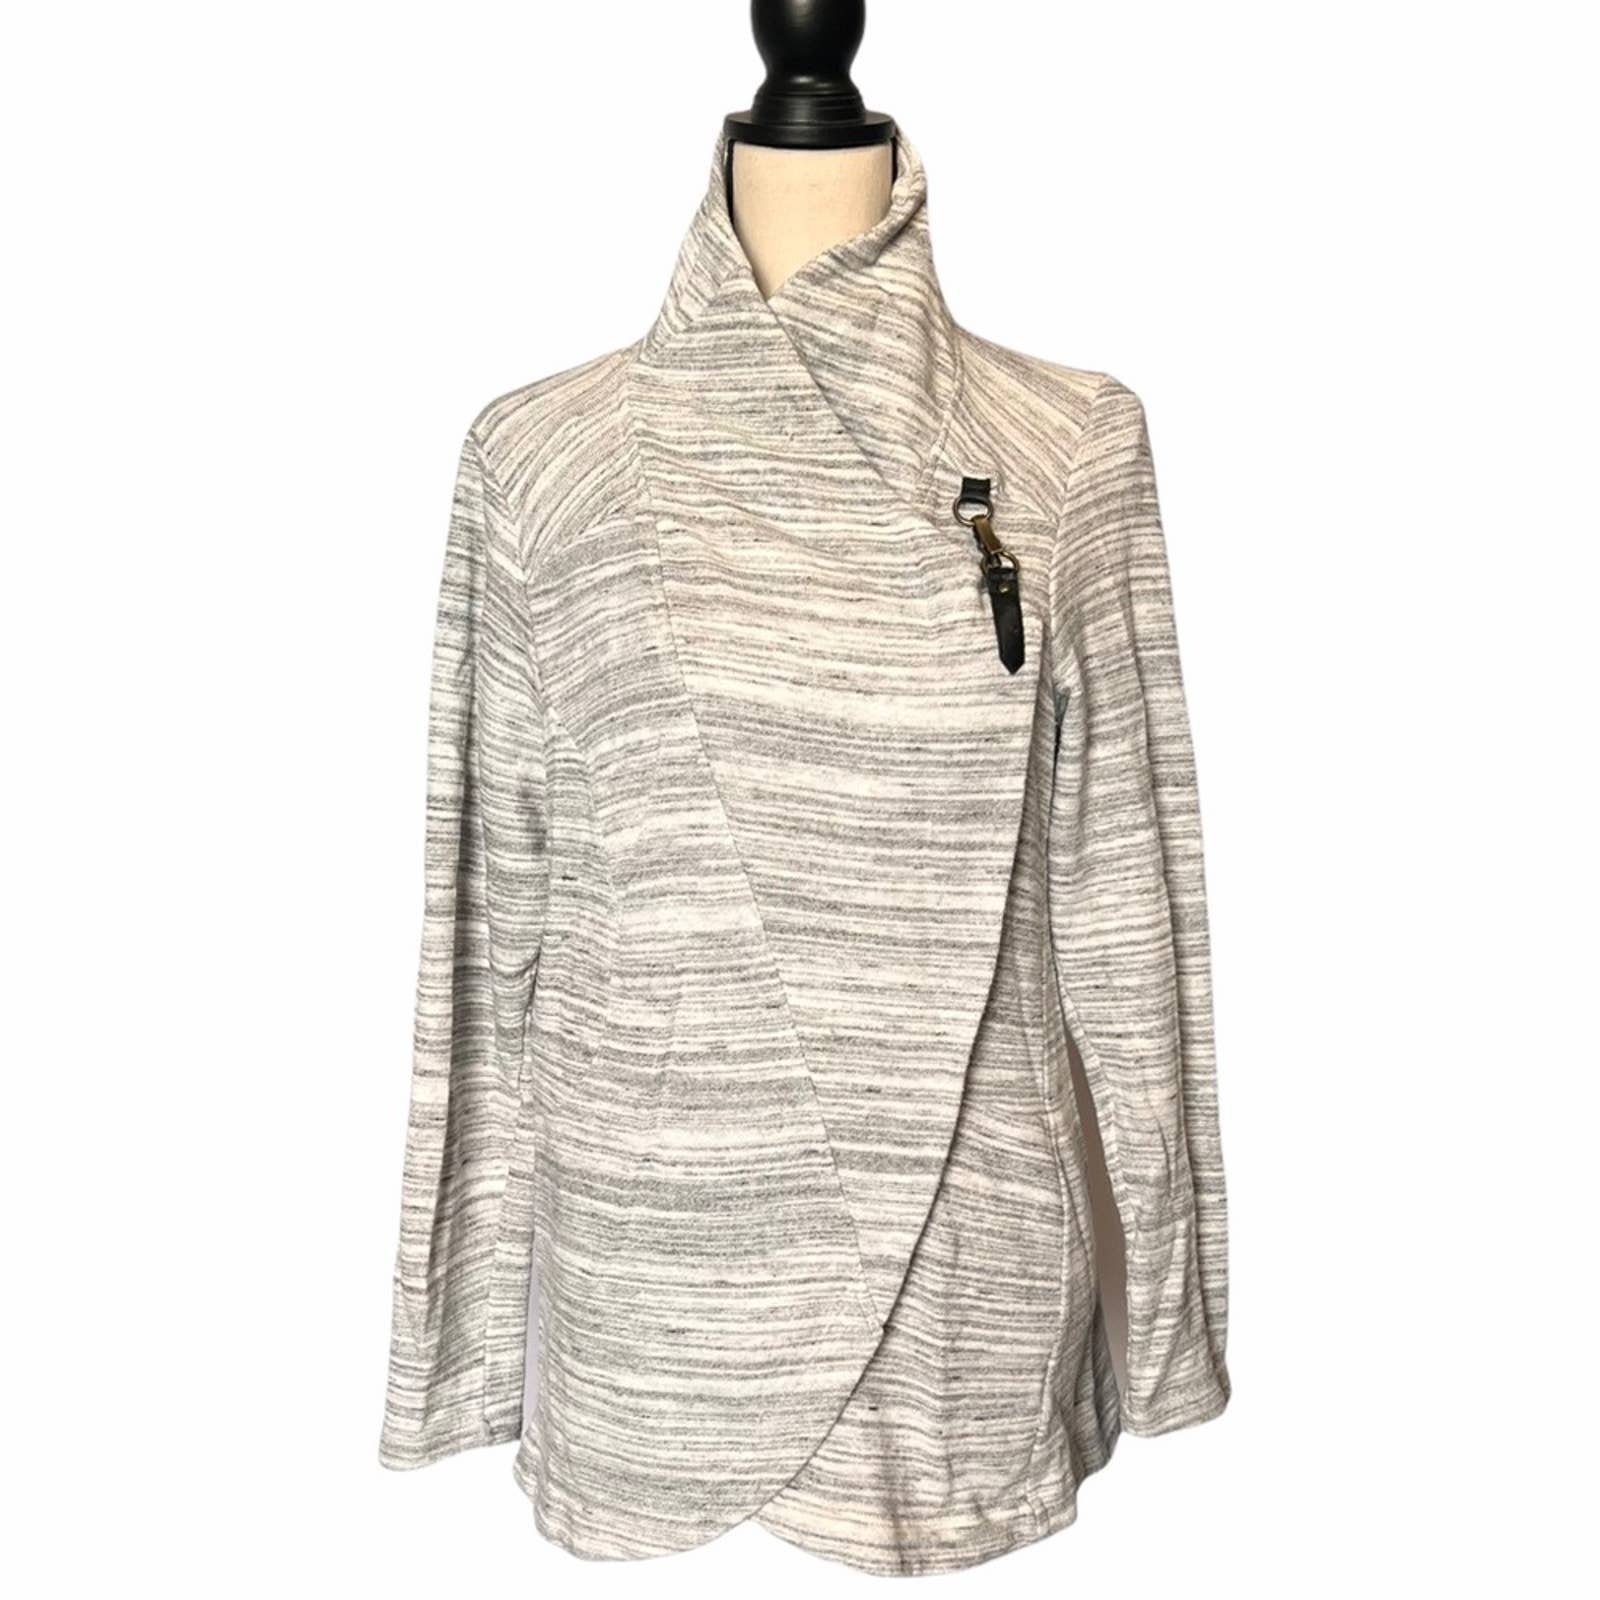 where to buy  Maurices wrap sweater/ cardigan. Size 1 oversized oG5DThI4m hot sale